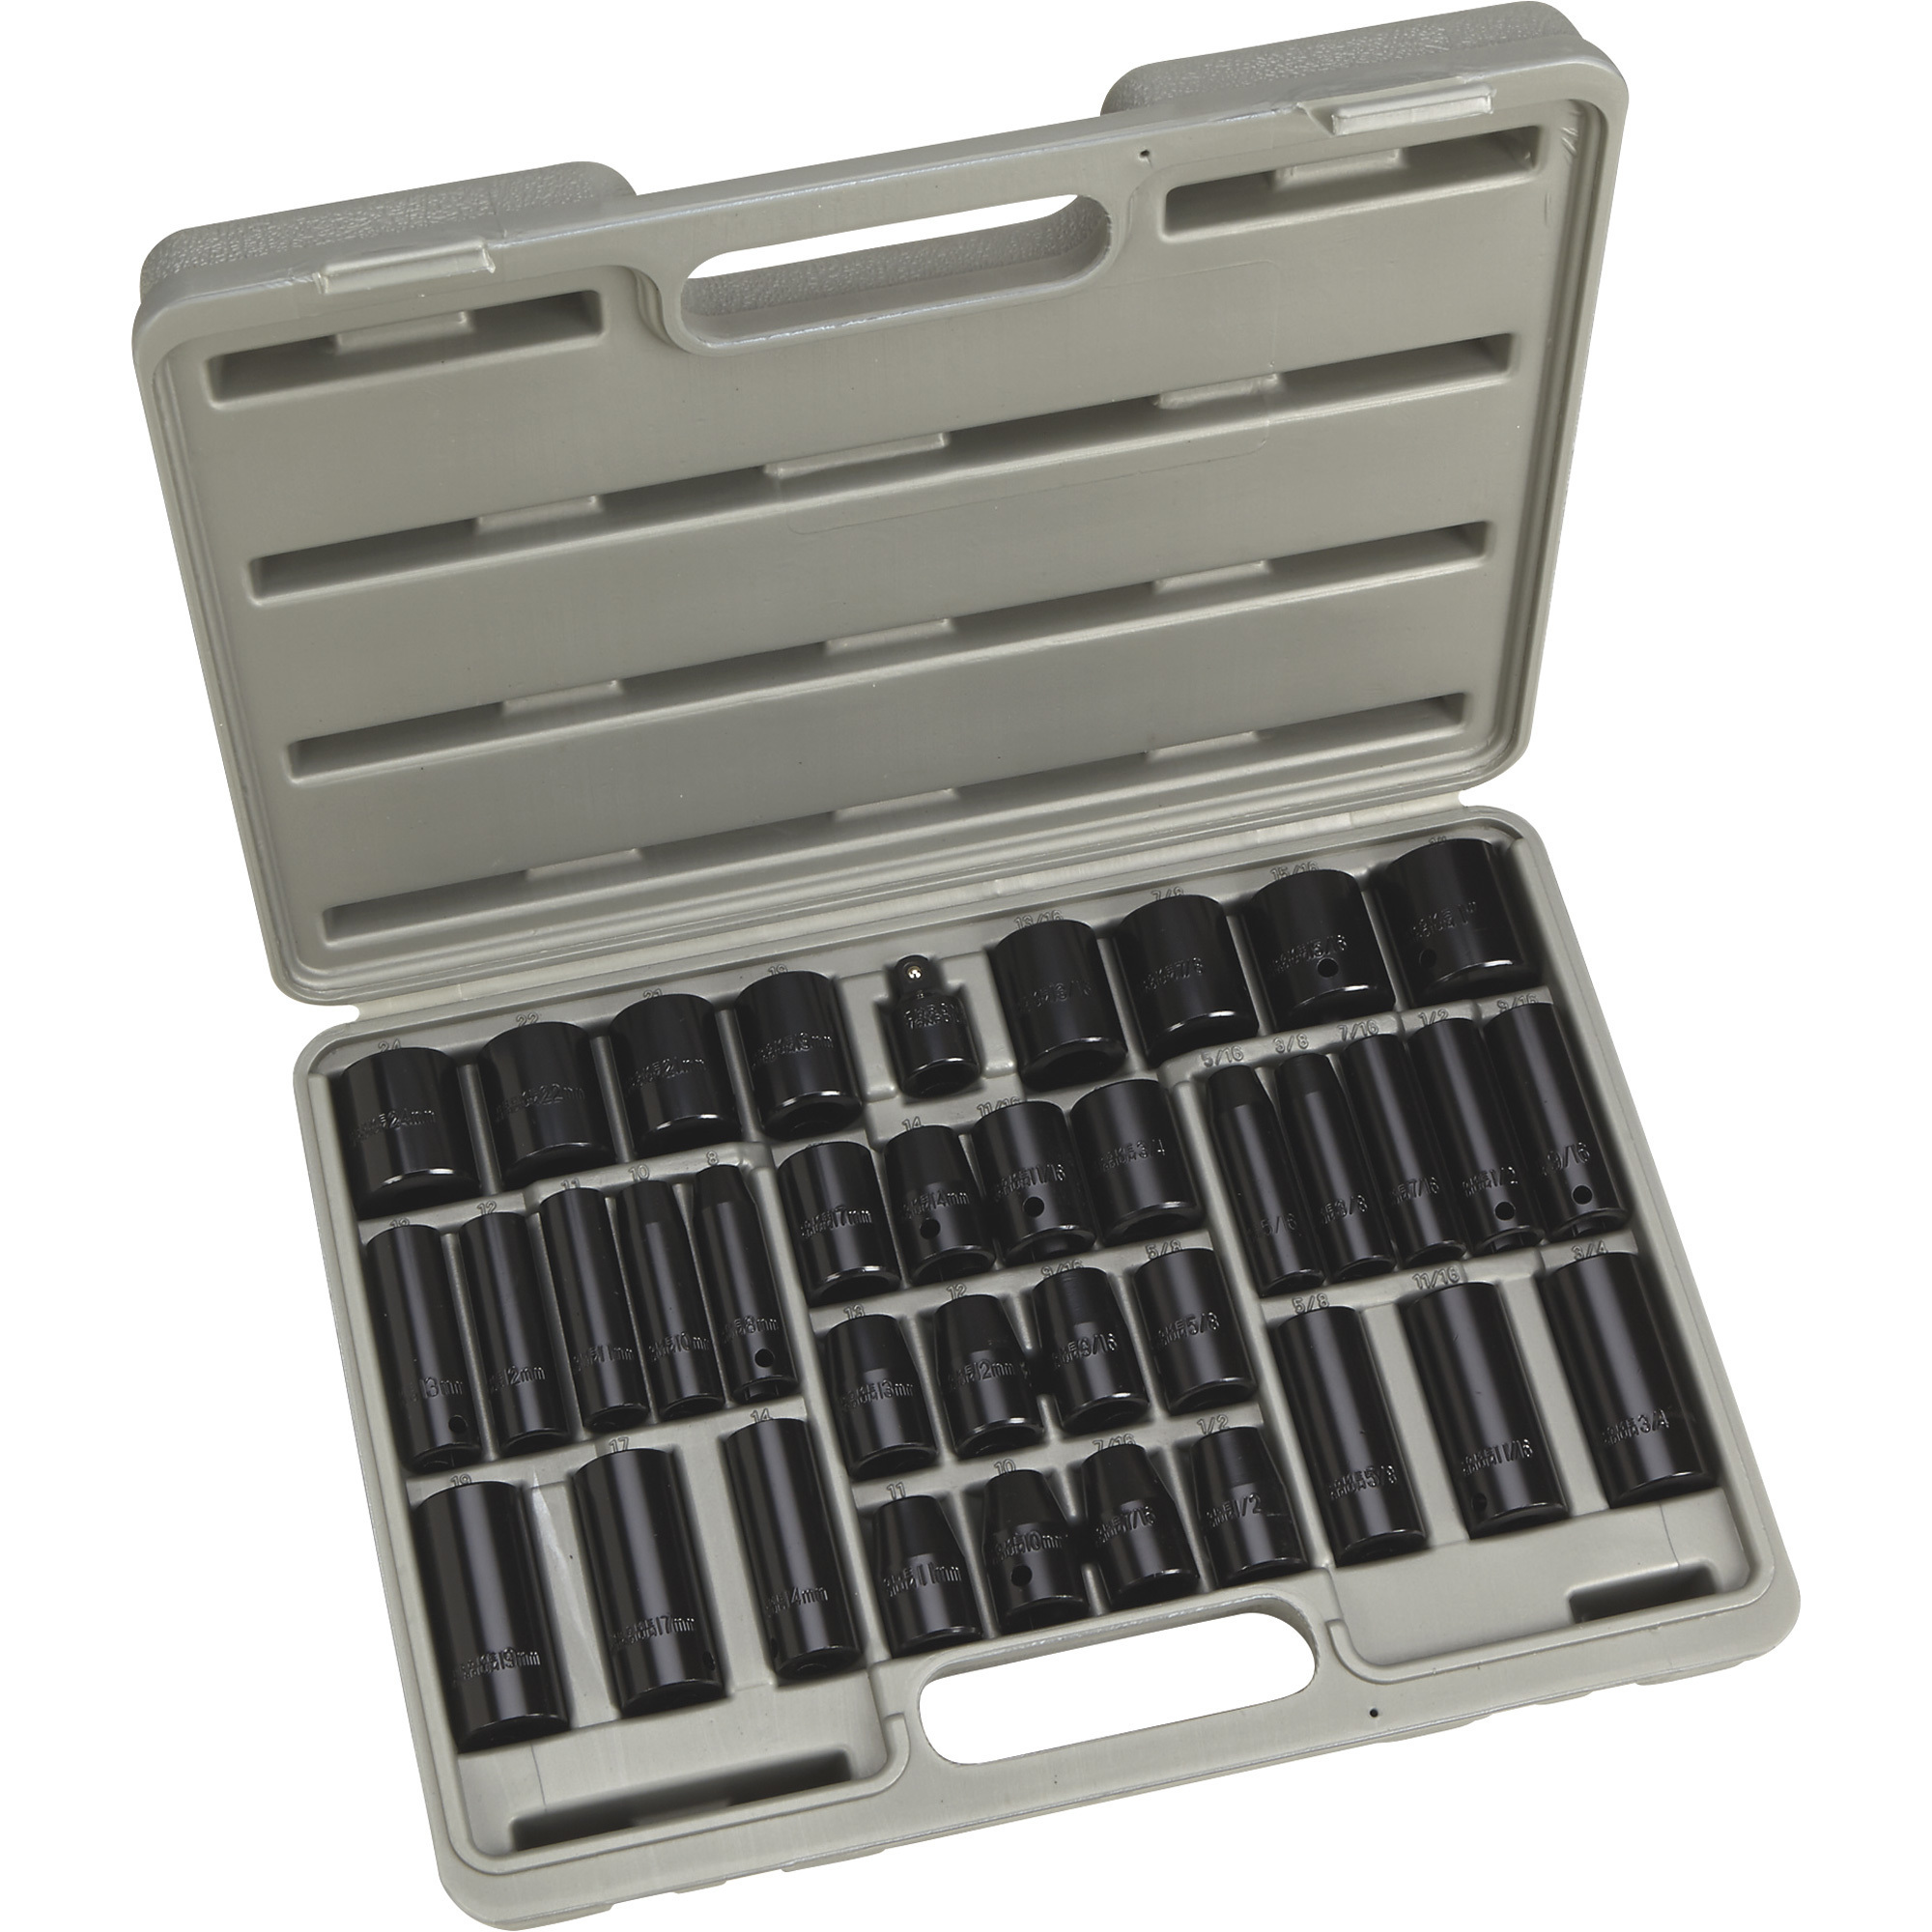 Klutch Impact Socket Set, 3/8in. and 1/2in. Drives, 38-Pc., SAE